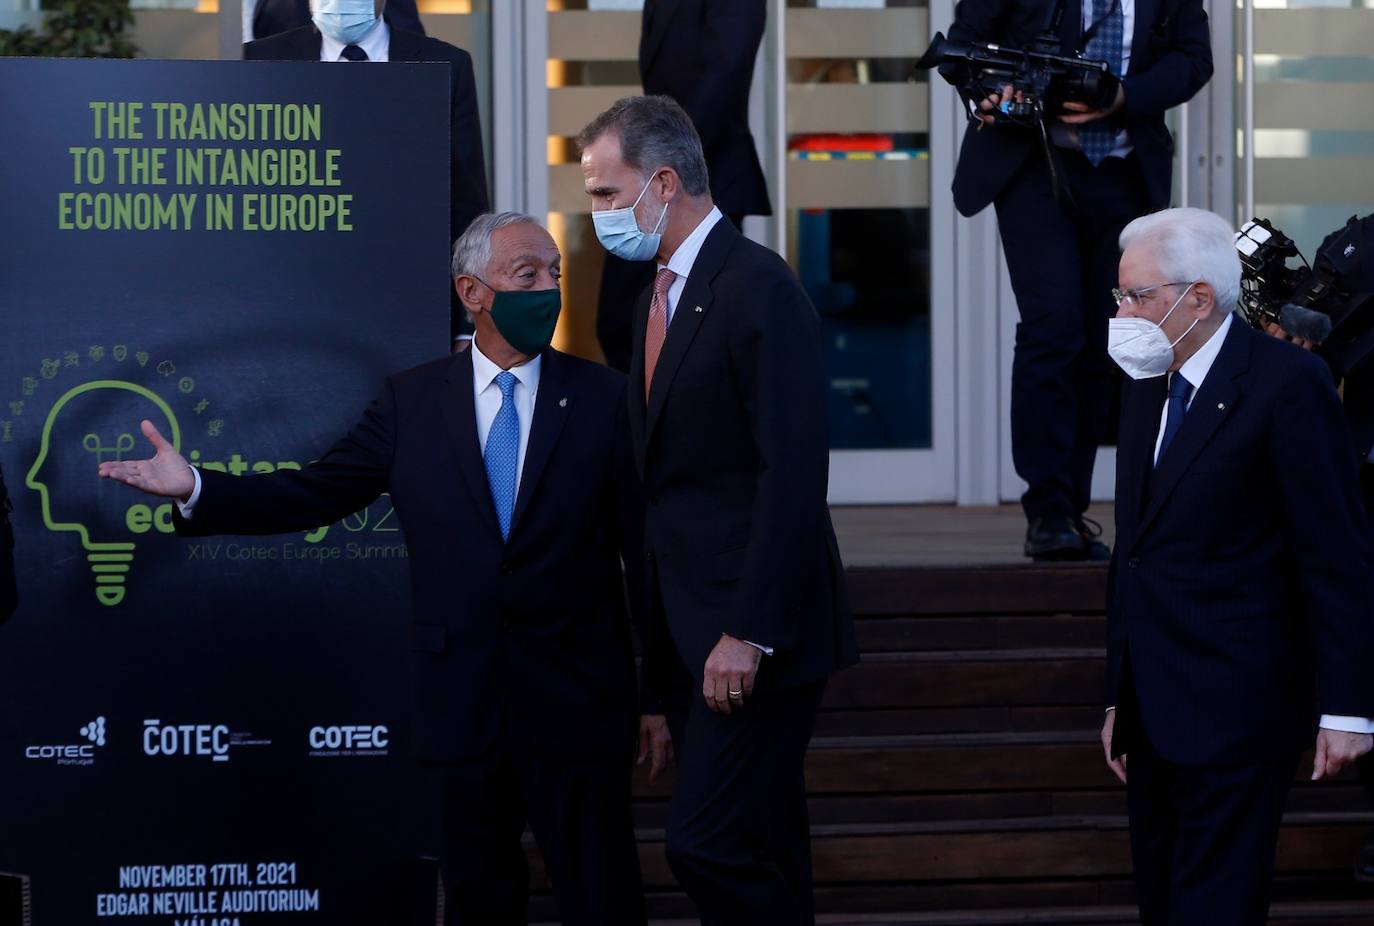 King Felipe attended the event alongside the presidents of Italy and Portugal.